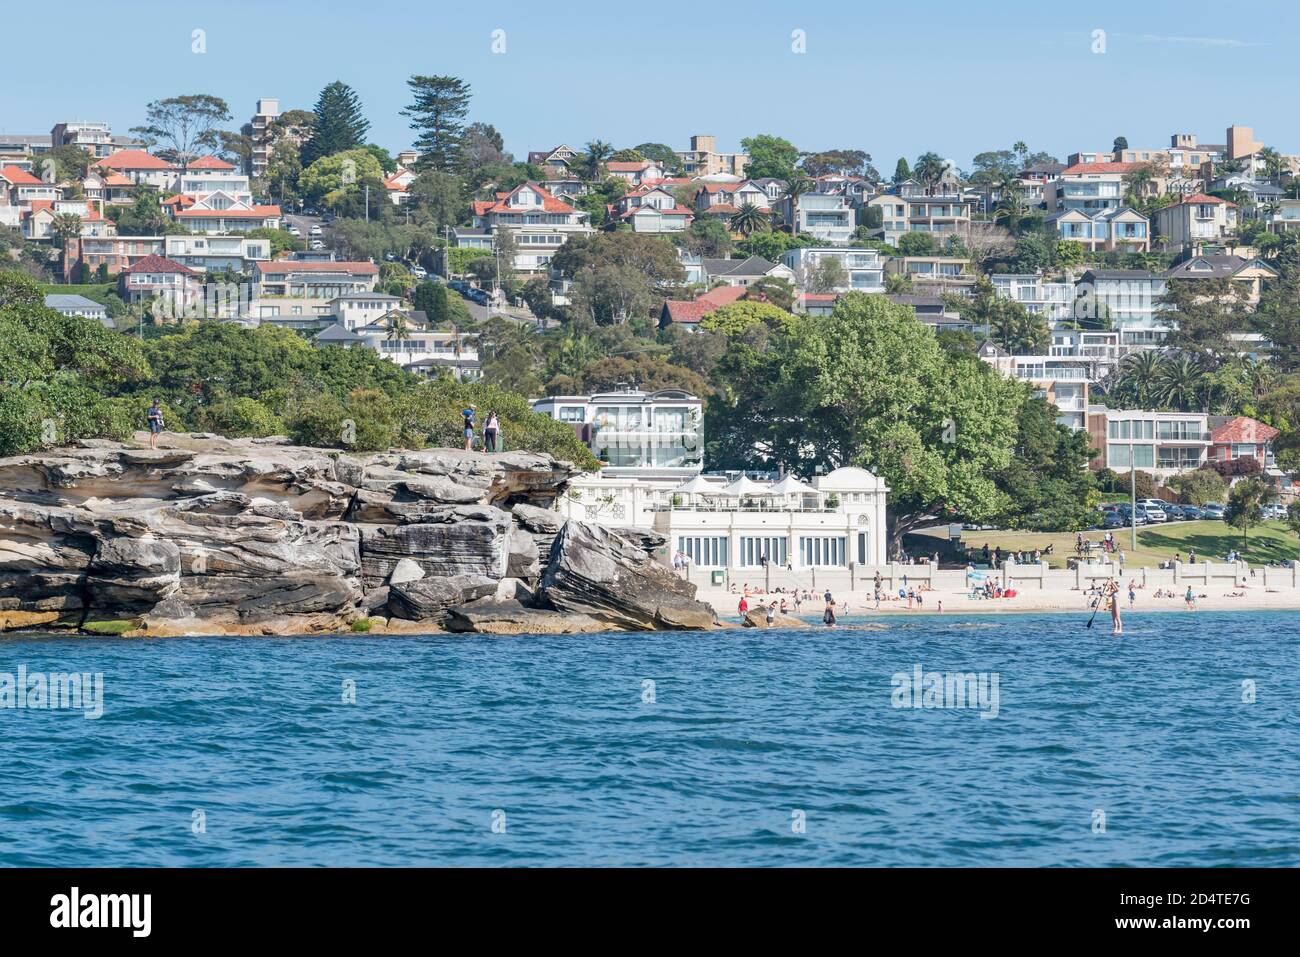 The 1928-29 constructed 'Spanish Mission' style, Bathers Pavilion at Balmoral Beach, Mosman, Sydney, Australia partially hidden by Rocky Point Island Stock Photo